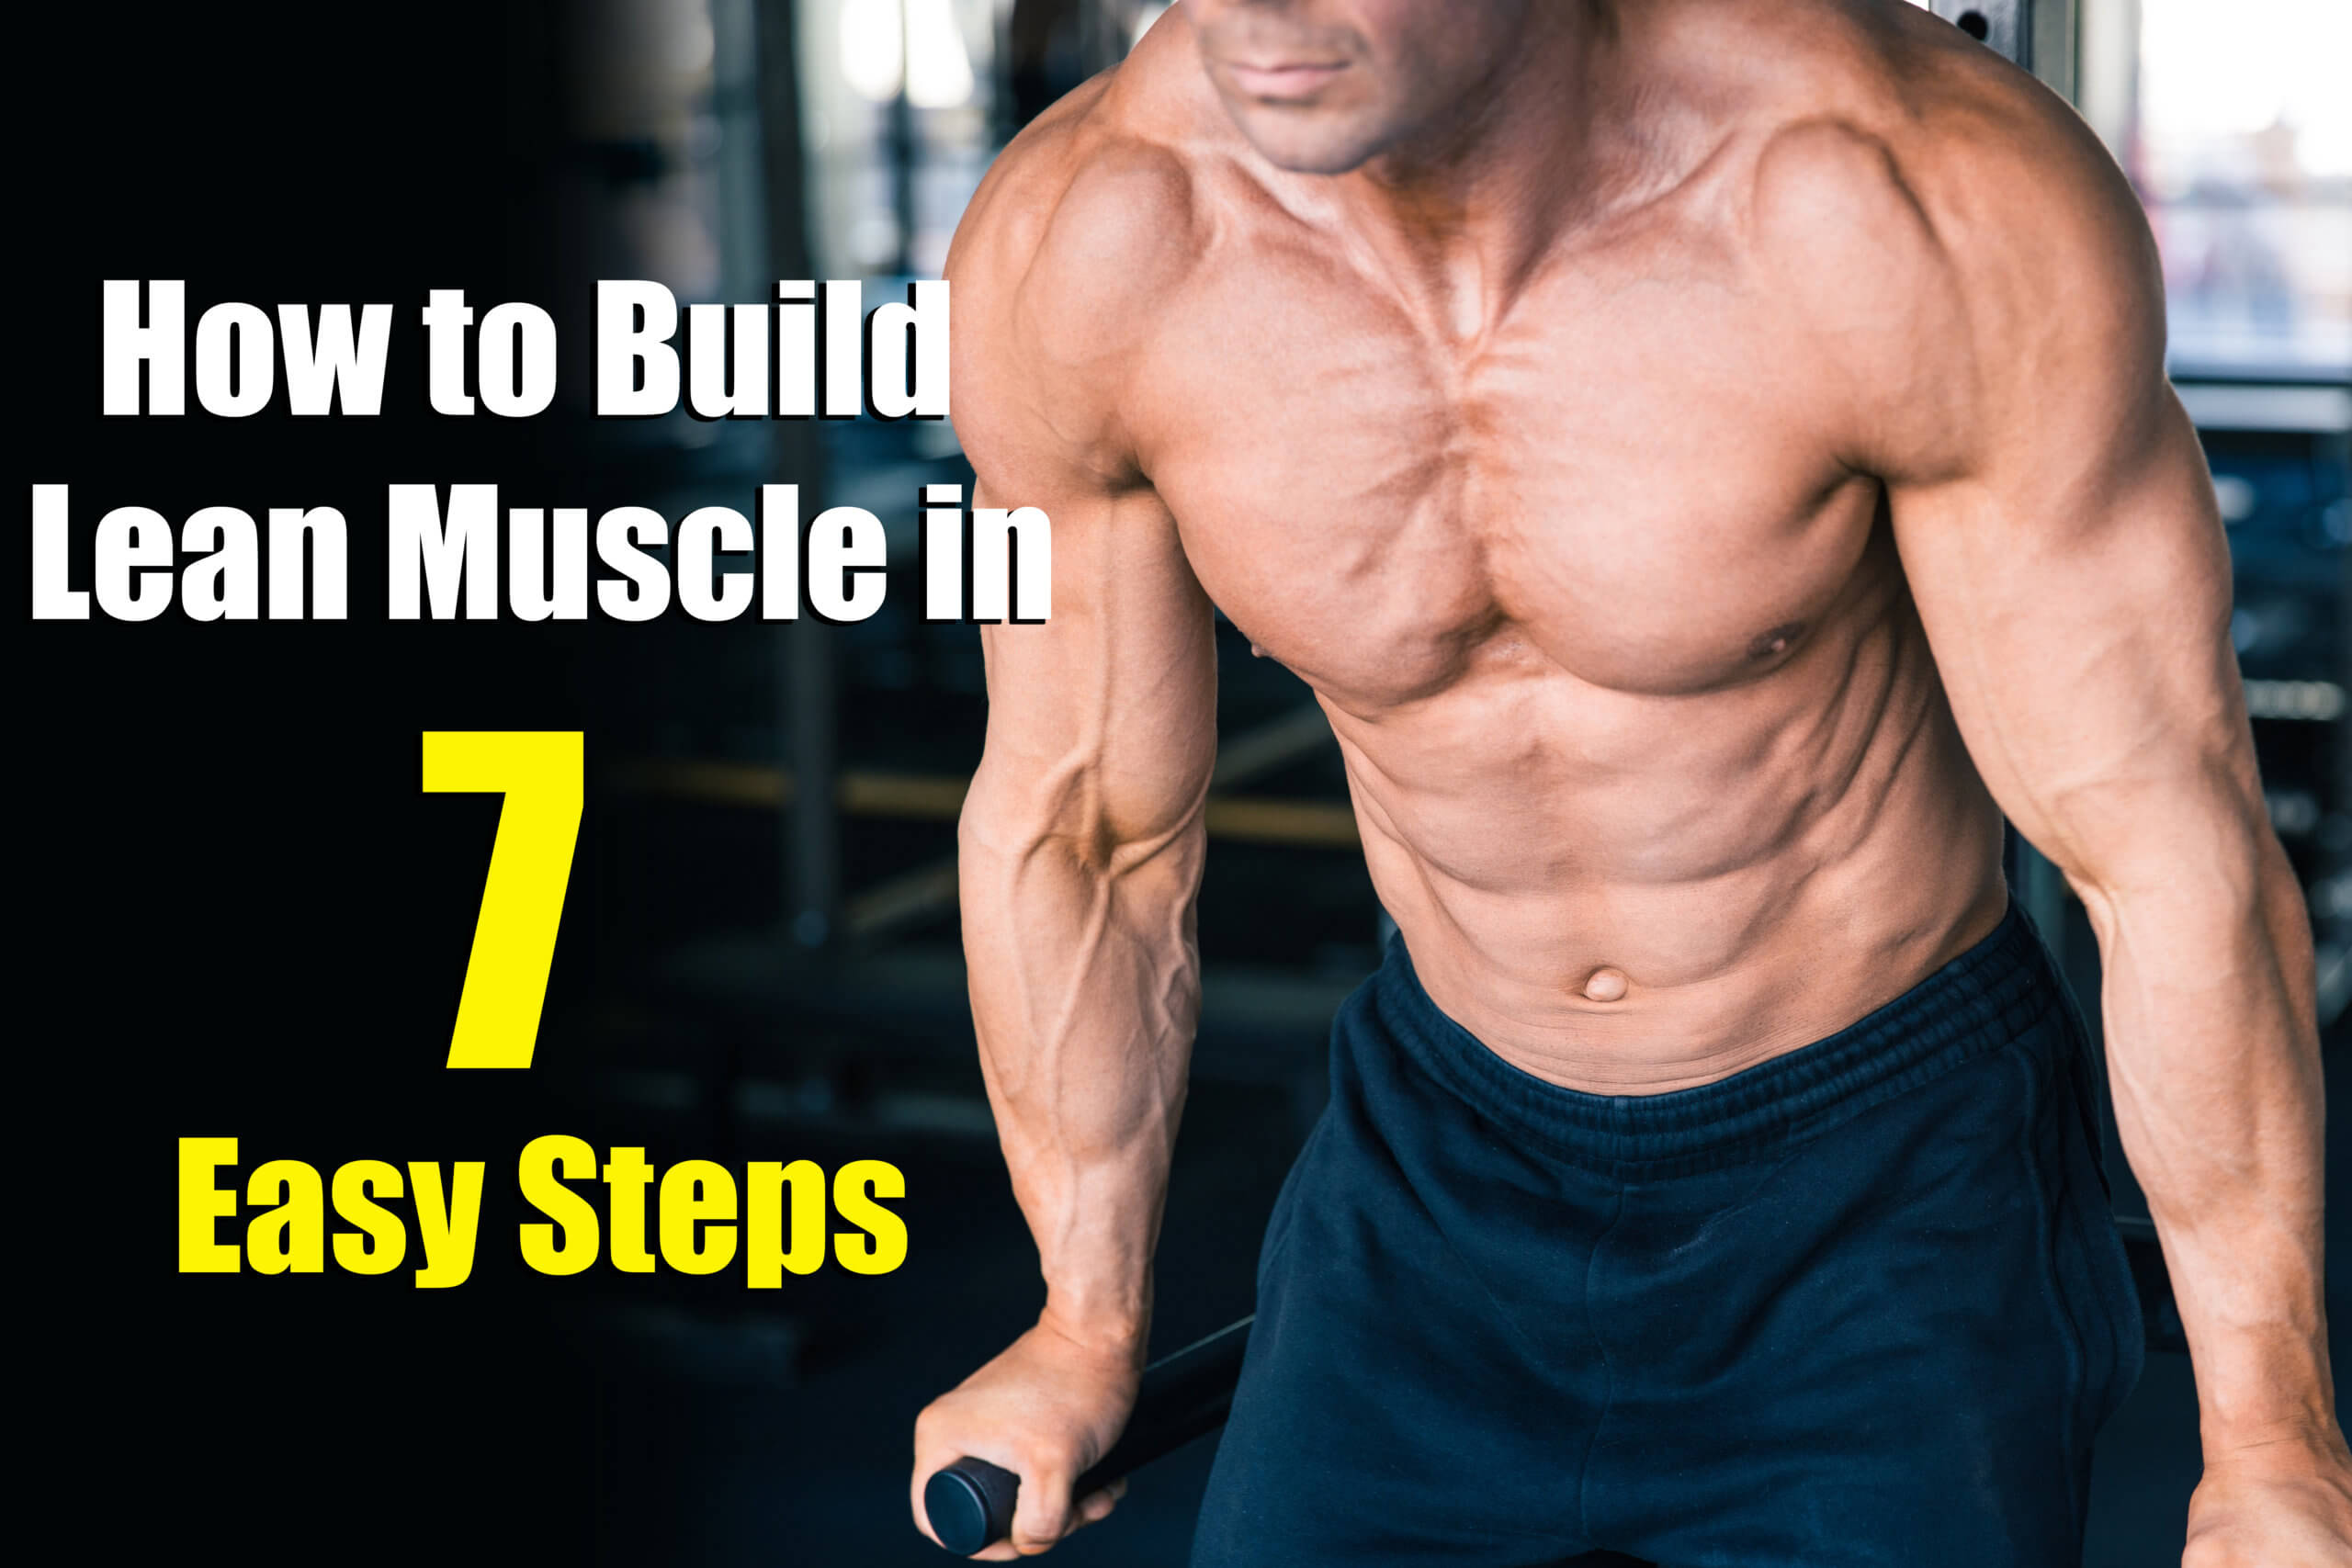 Lean muscle building tips and tricks